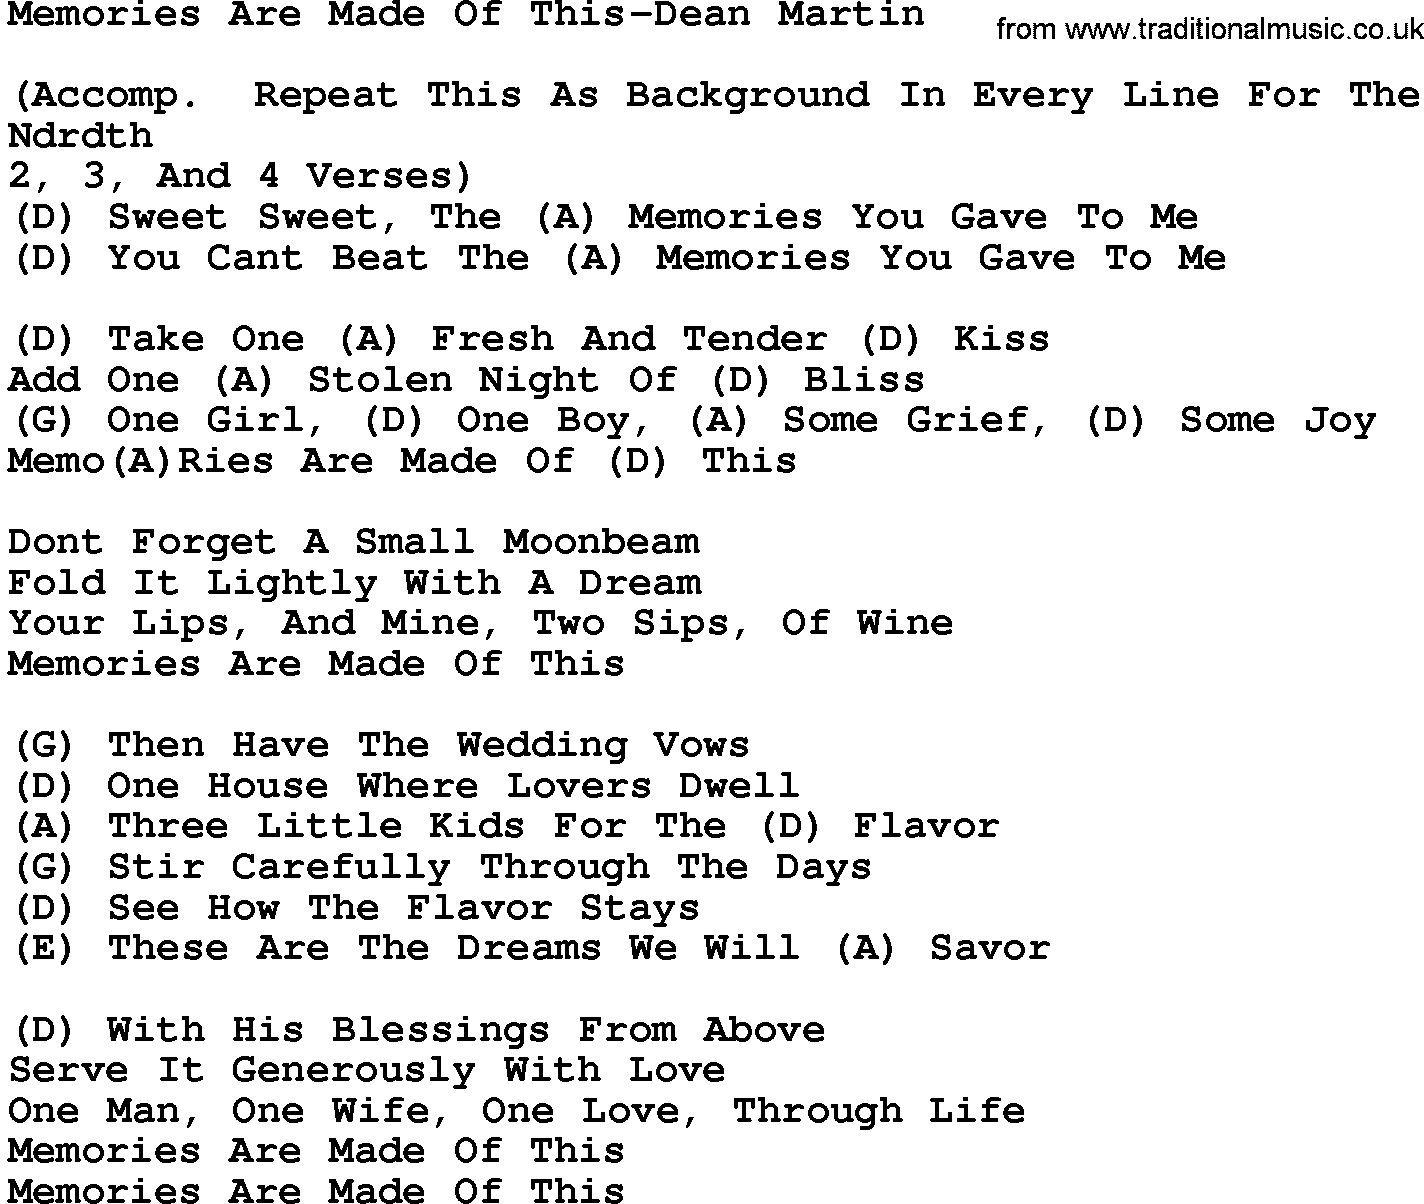 Country music song: Memories Are Made Of This-Dean Martin lyrics and chords